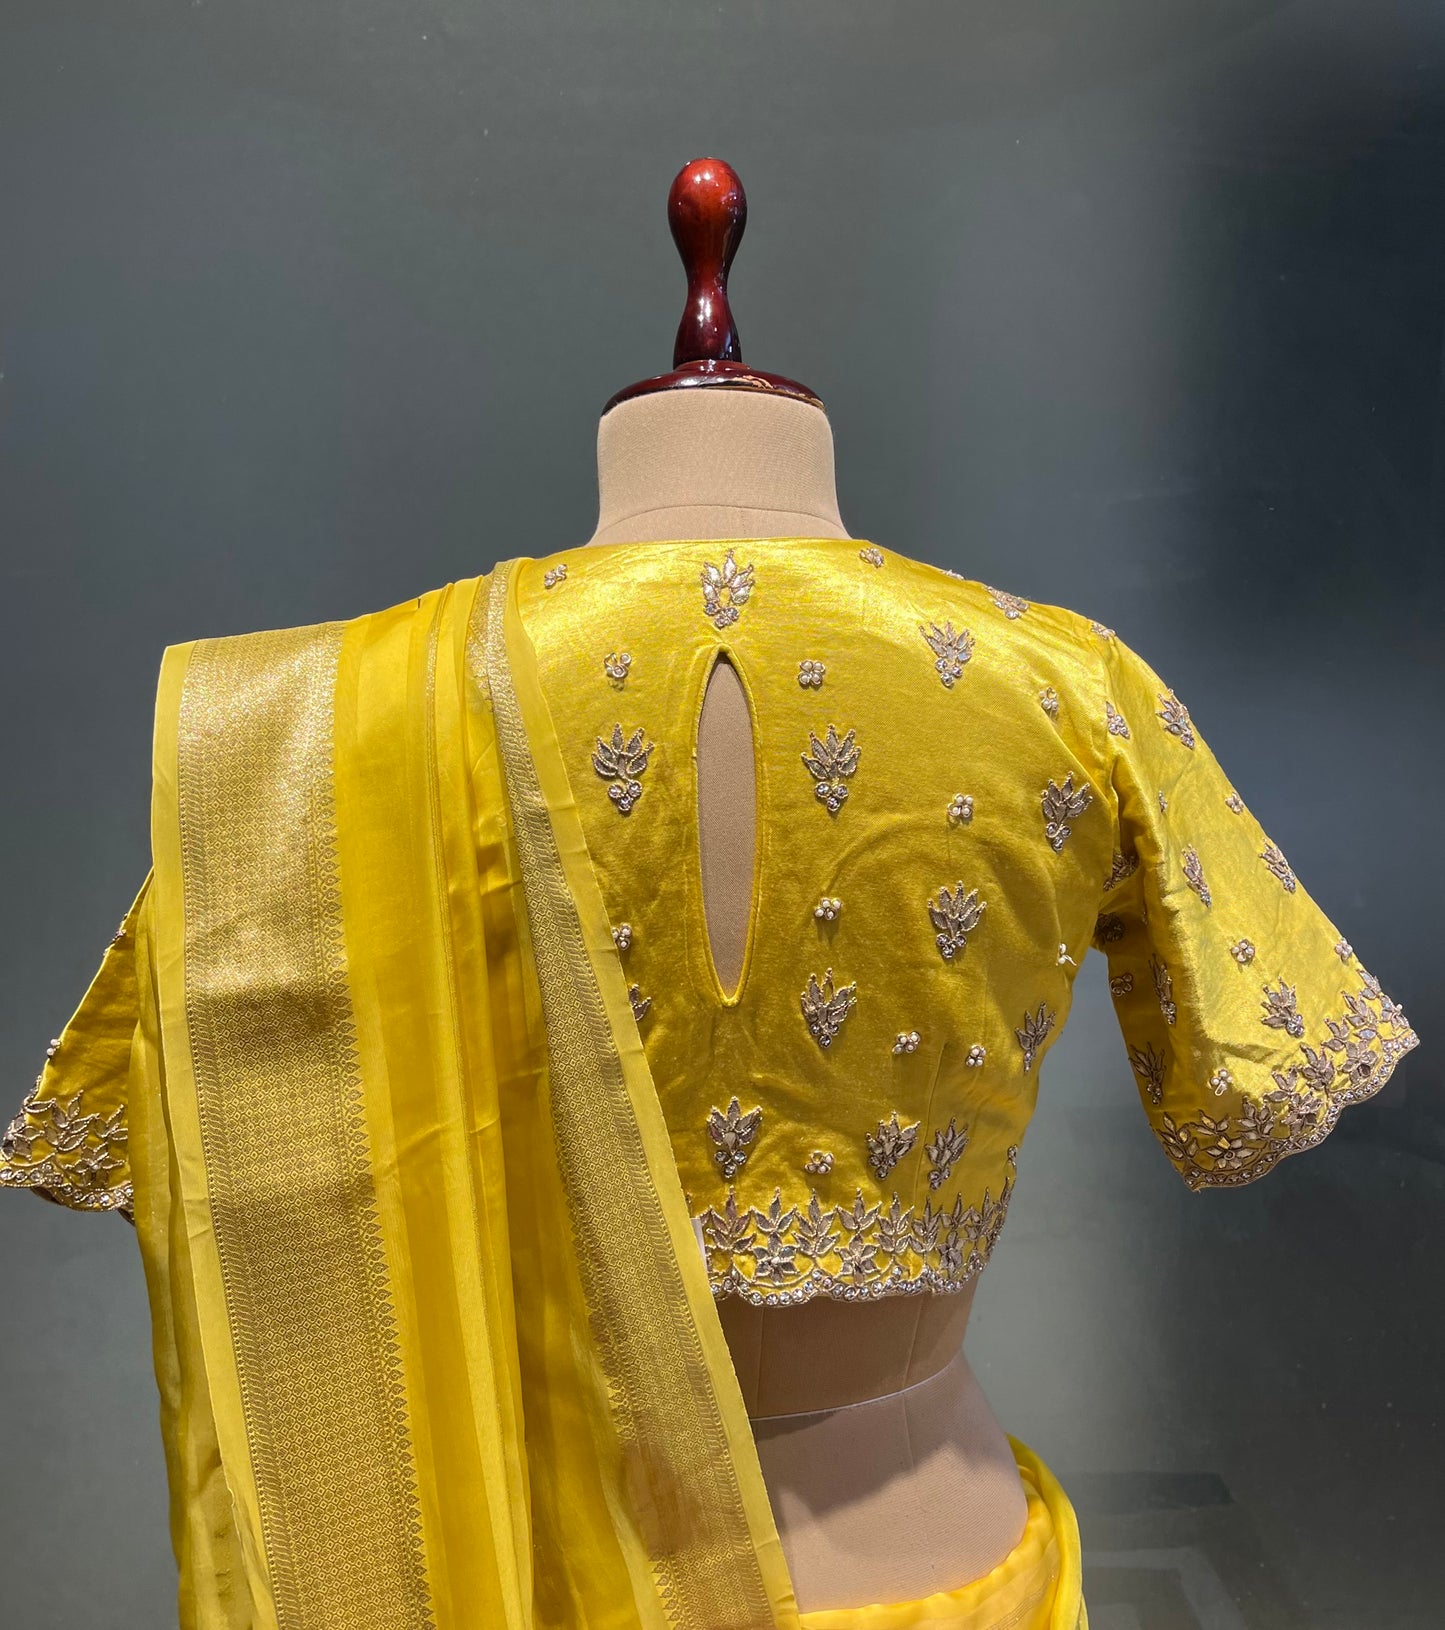 LEMON YELLOW COLOUR ORGANZA SAREE WITH READYMADE EMBROIDERED BLOUSE EMBELLISHED WITH GOTA PATTI WORK